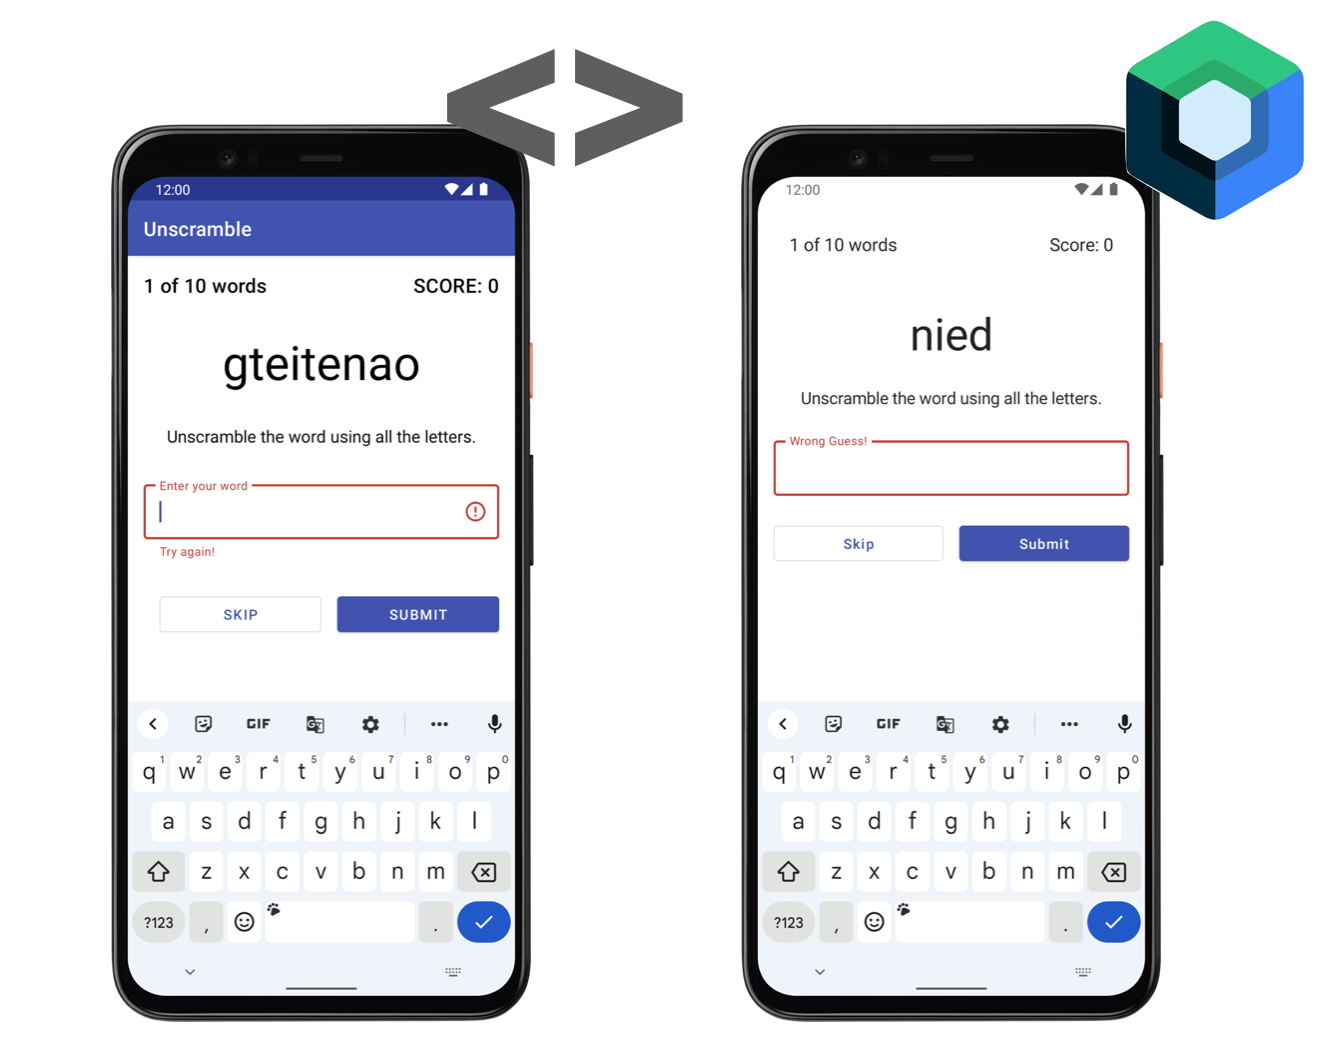 Image if two phone screens side by side showing the 'unscramble the word' concept being used in Android Basics in Kotlin course (left) and in Jetpack Compose for Android Developers (right)